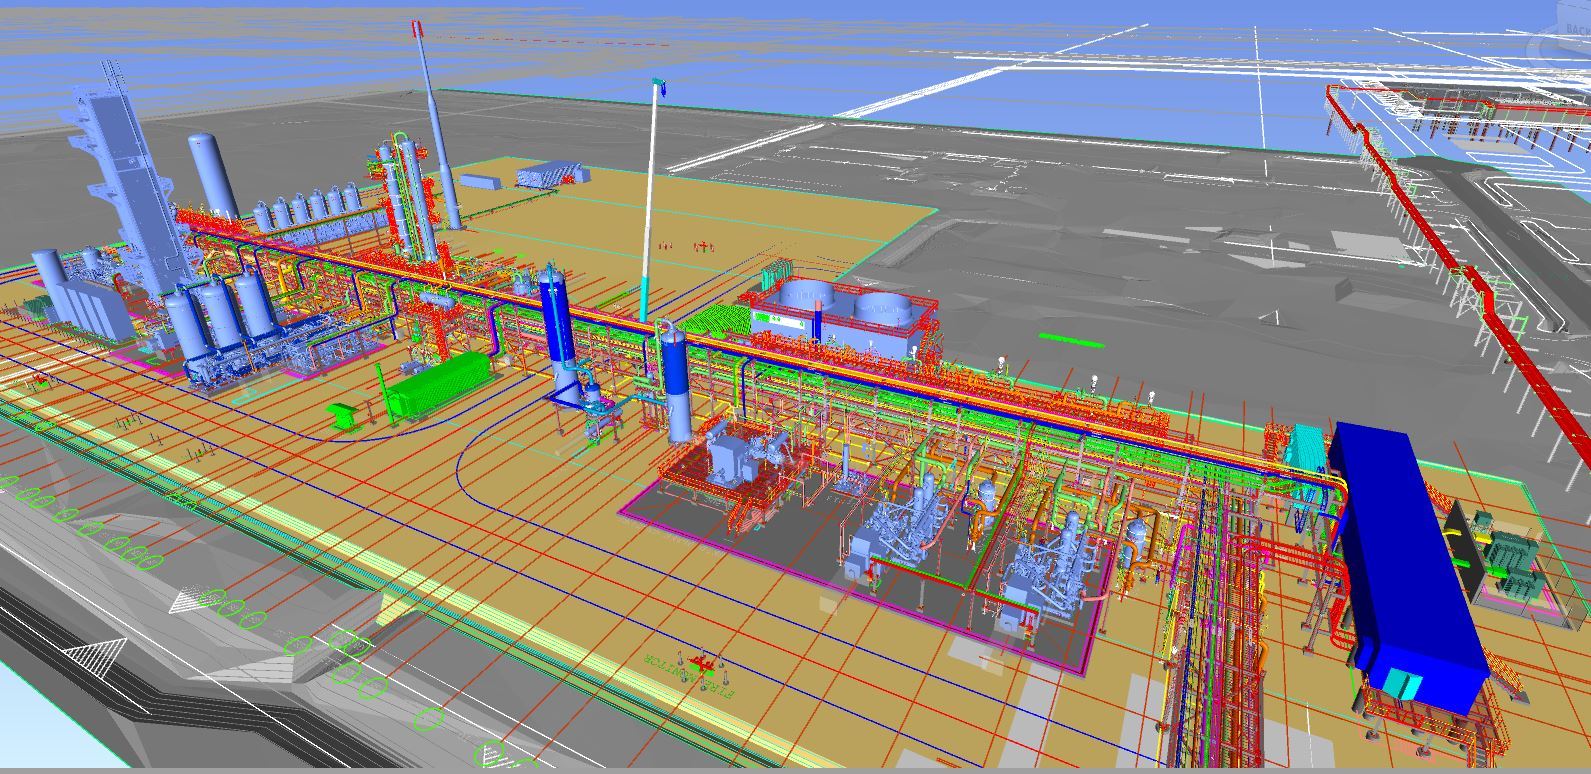 KP Engineering's 3D model of a Syngas Separation Unit (SSU) in Southeastern Louisiana